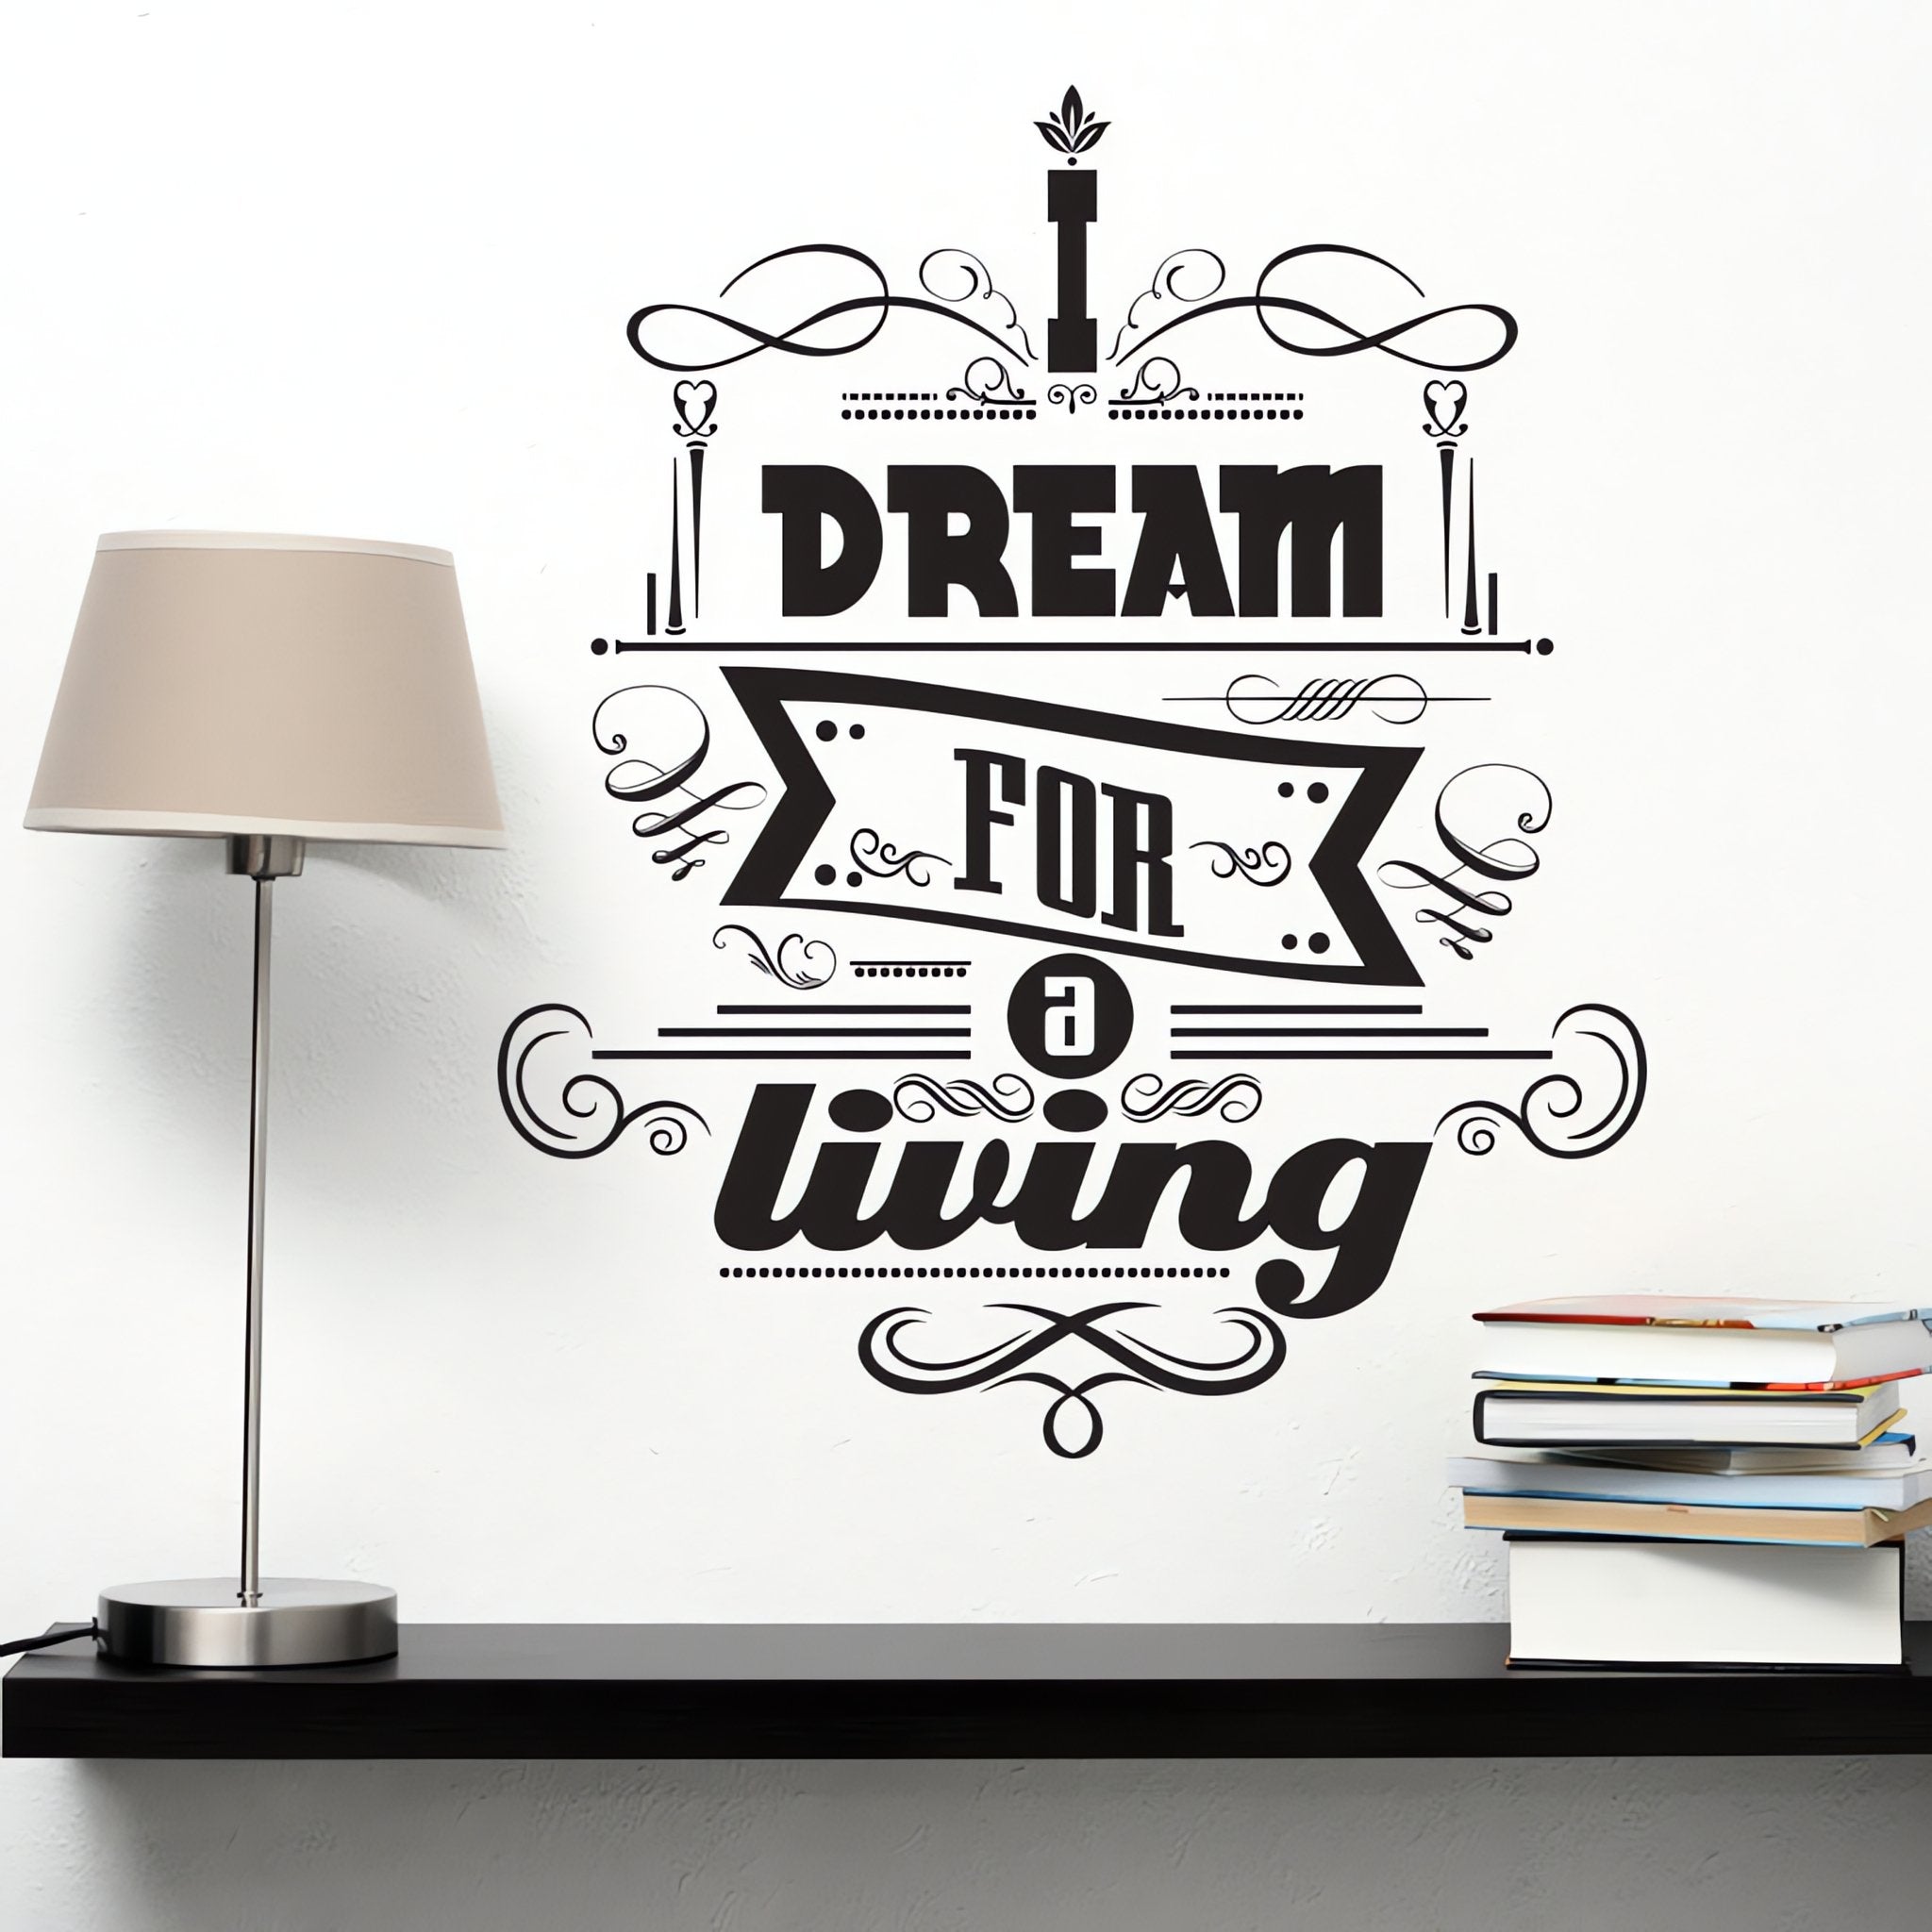 Wall quote sticker with text "I Dream For A Living" next to a shelf, a lamp and some books.